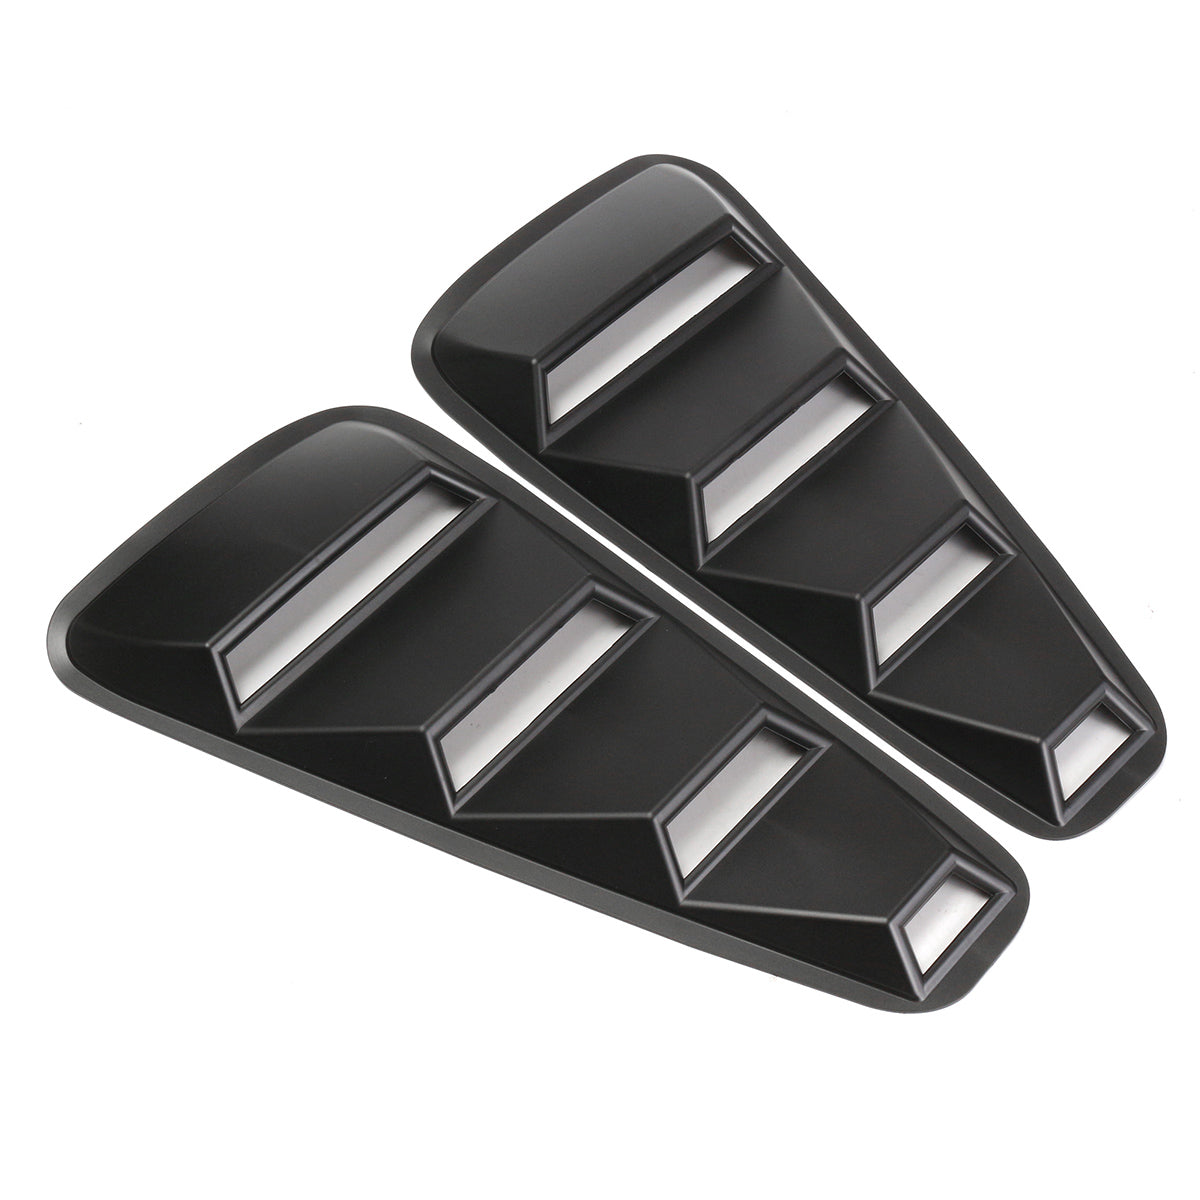 1 Pair 1/4 Quarter ABS Side Window Shield Louvers Scoop Cover Vent Black For 05-2014 Mustang - Auto GoShop